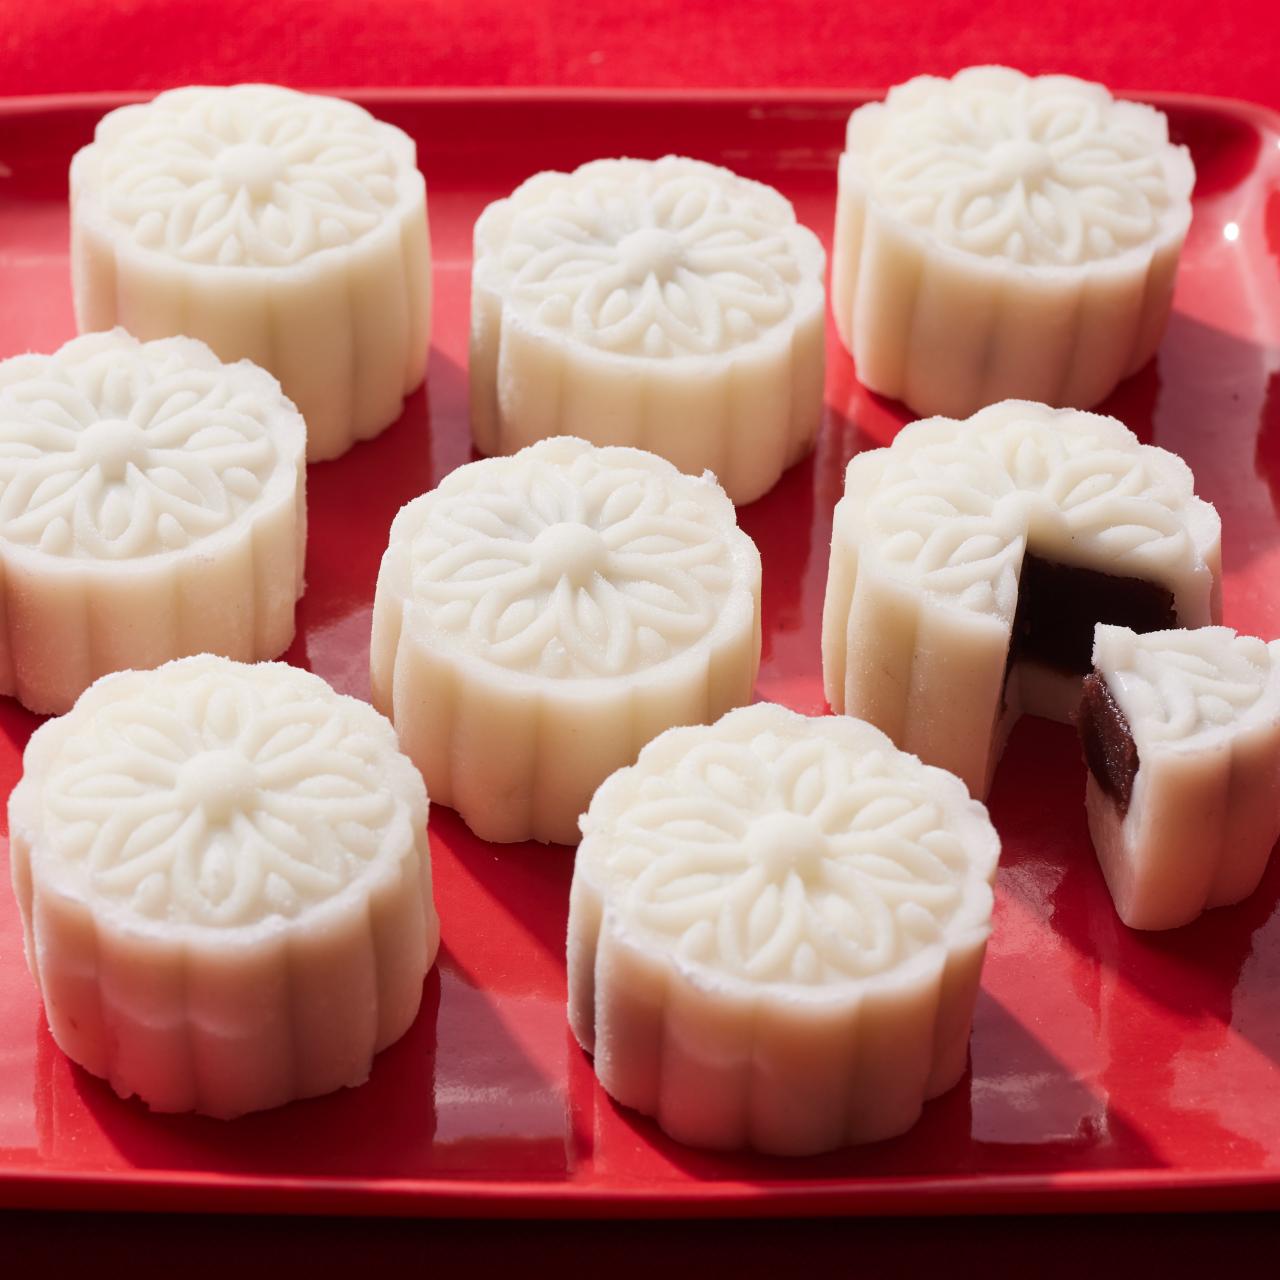 Most Luxurious Mooncakes The World Has Ever Seen